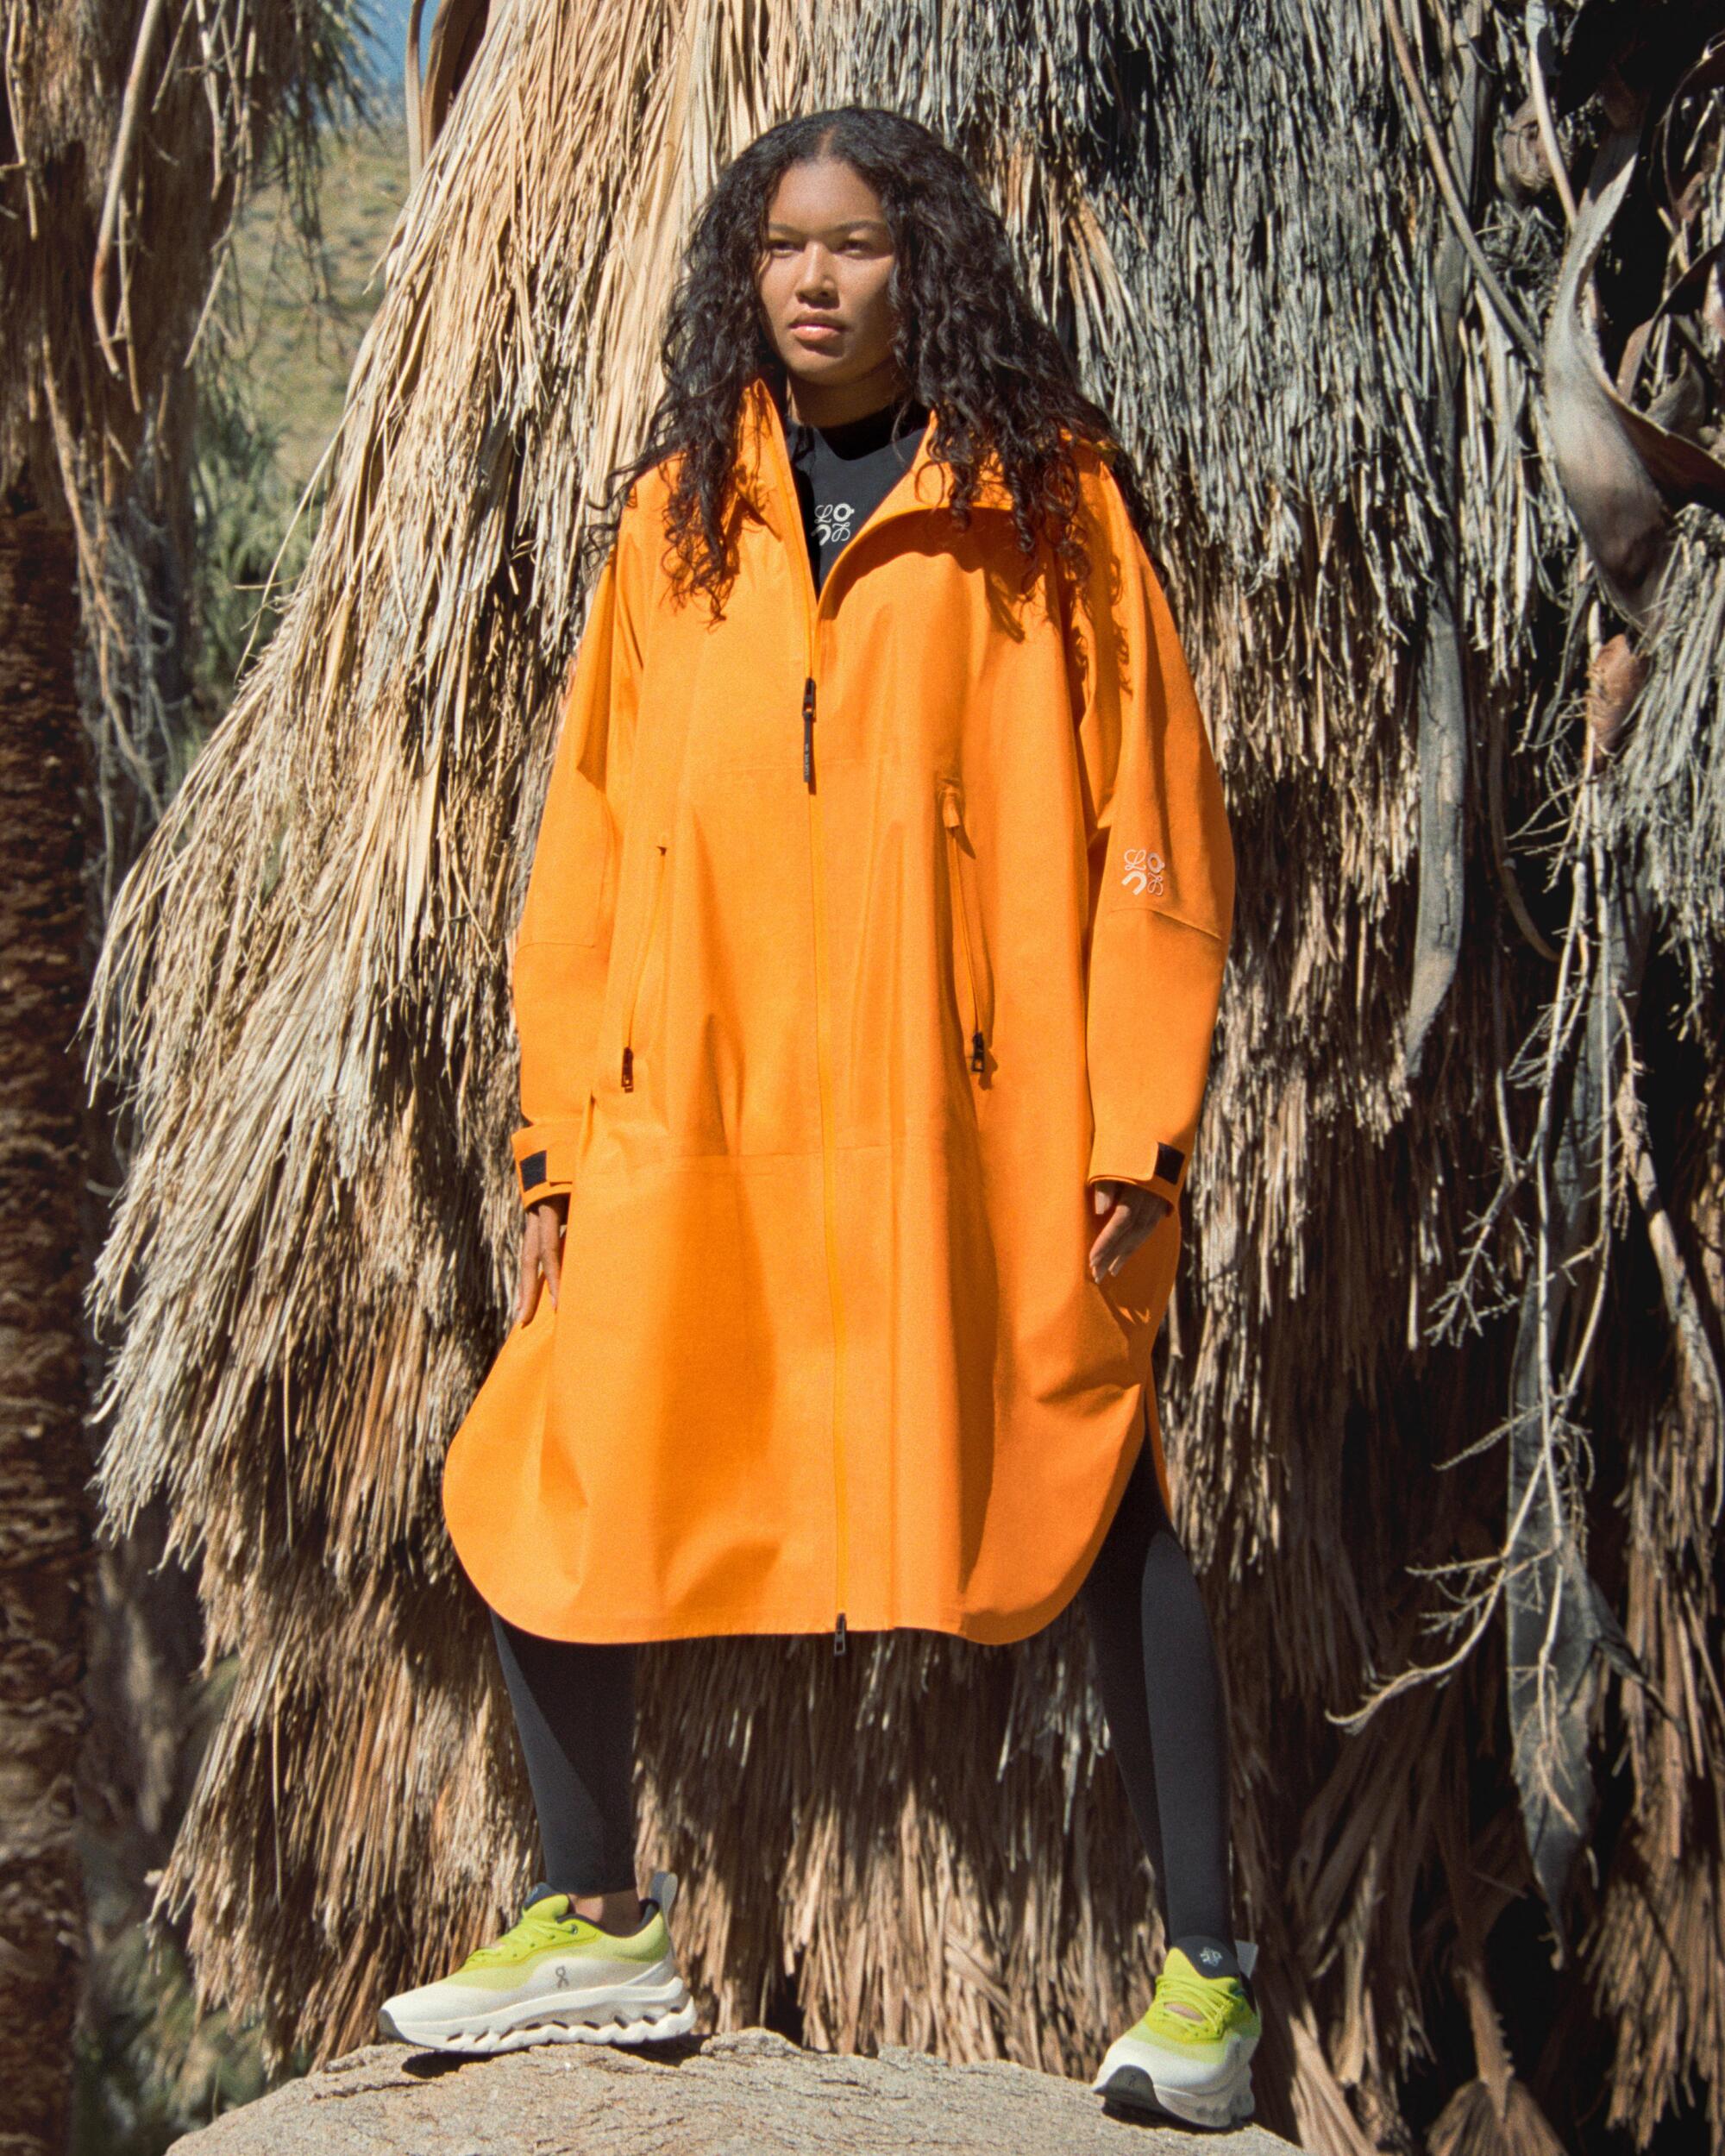 A person stands outdoors wearing a large orange coat.